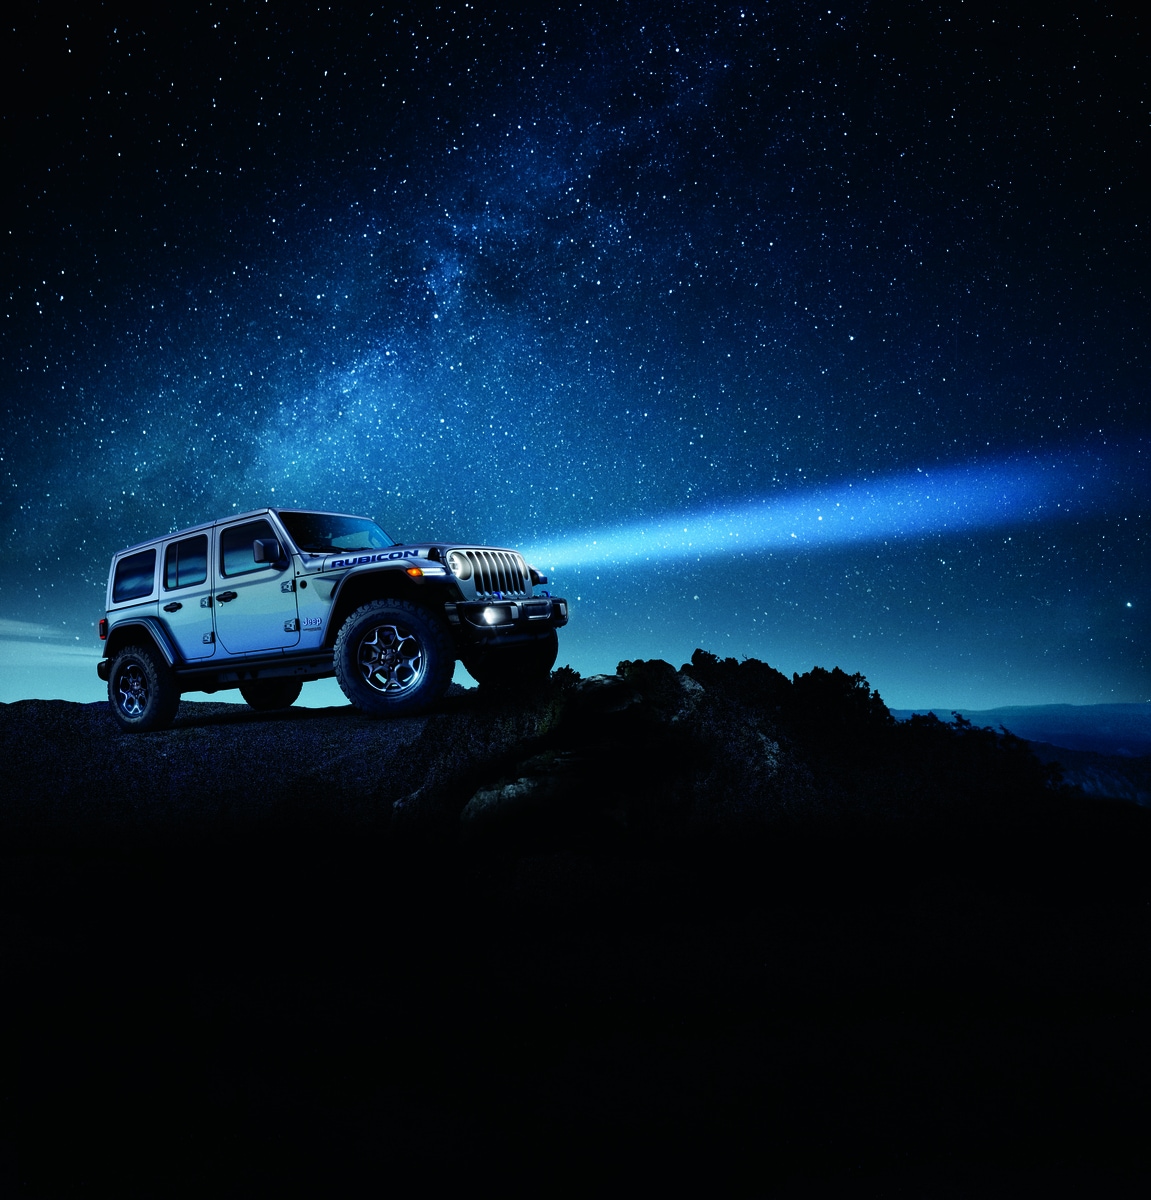 silver Jeep Wrangler Rubicon SUV parked on a rocky ridge, under a starry night